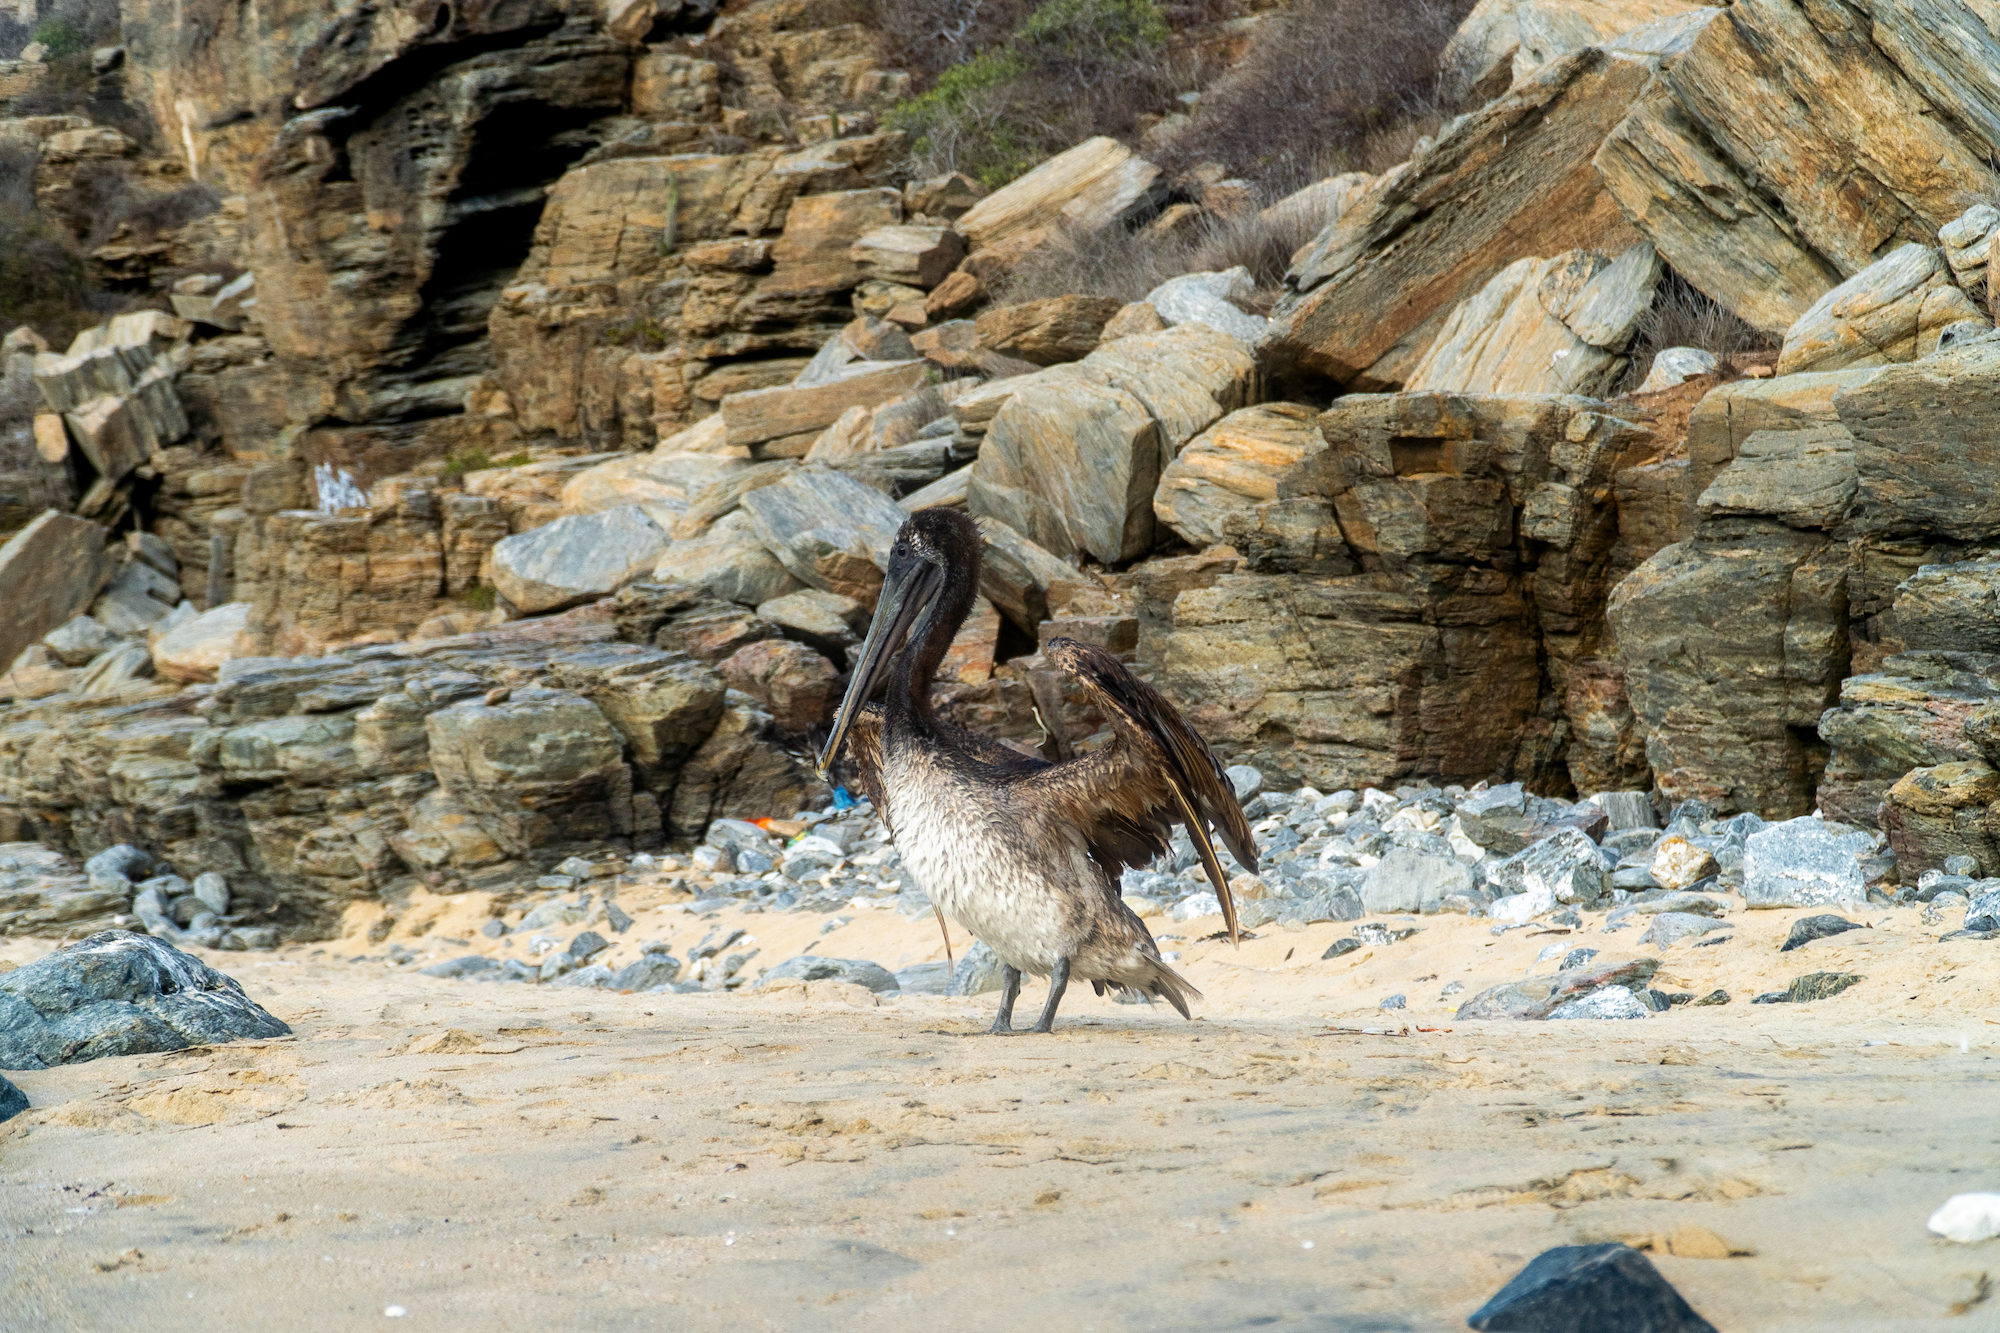 Brown pelican on the beach.